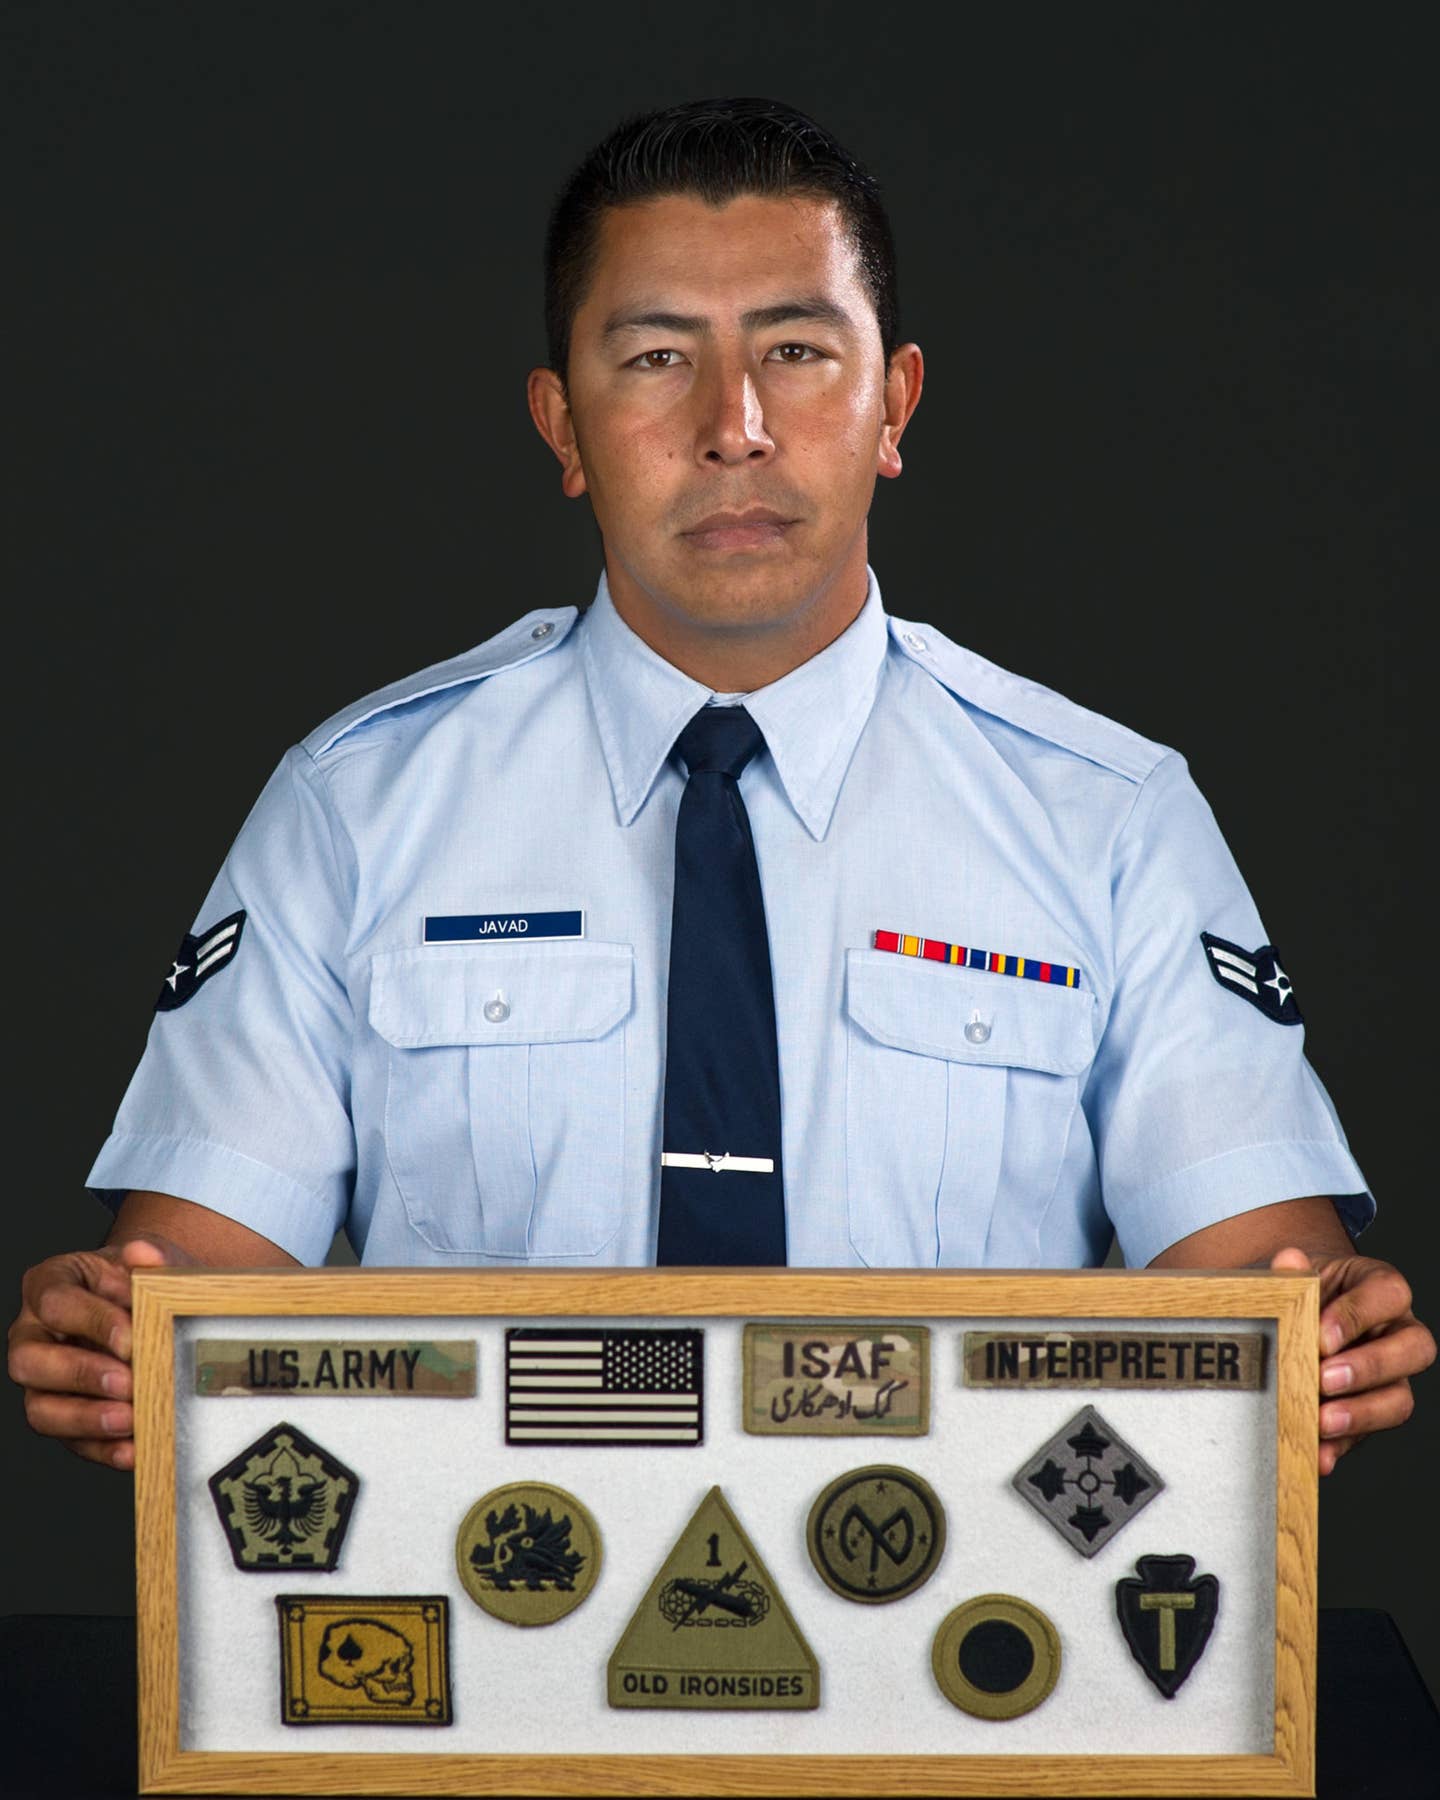 Airman 1st Class Mohammad Javad from the 60th Aerial Port Squadron, Travis Air Force Base, Calif., poses with some keepsakes he collected during his time as a linguist with U.S. forces, March. 6, 2018. (Photo by Louis Briscese)